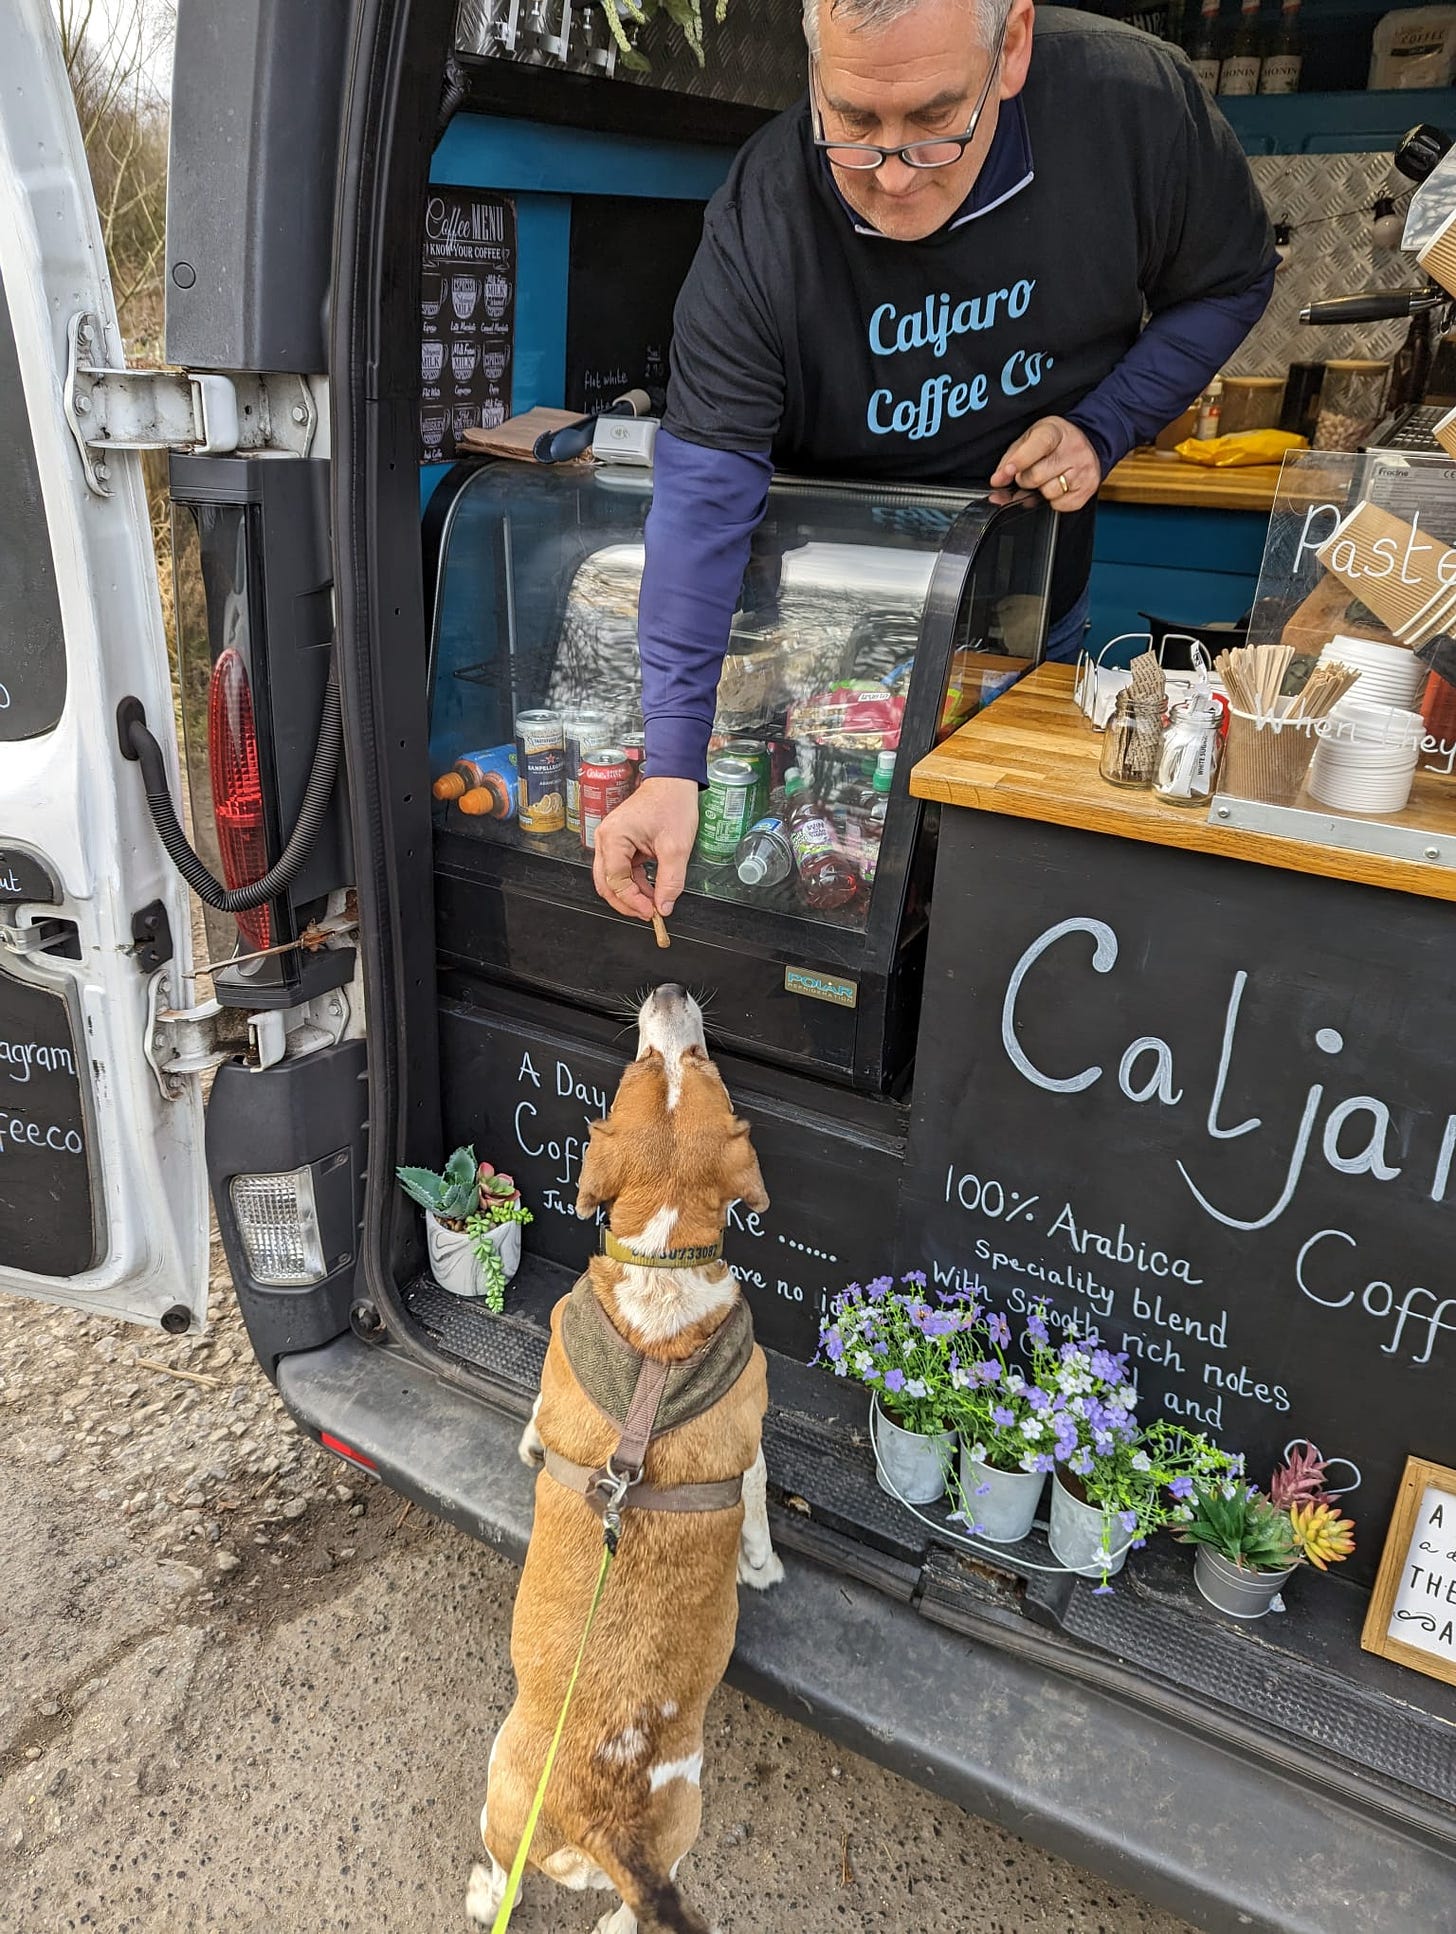 Leia the beagle recieving her free dog biscuit from the coffee van man.